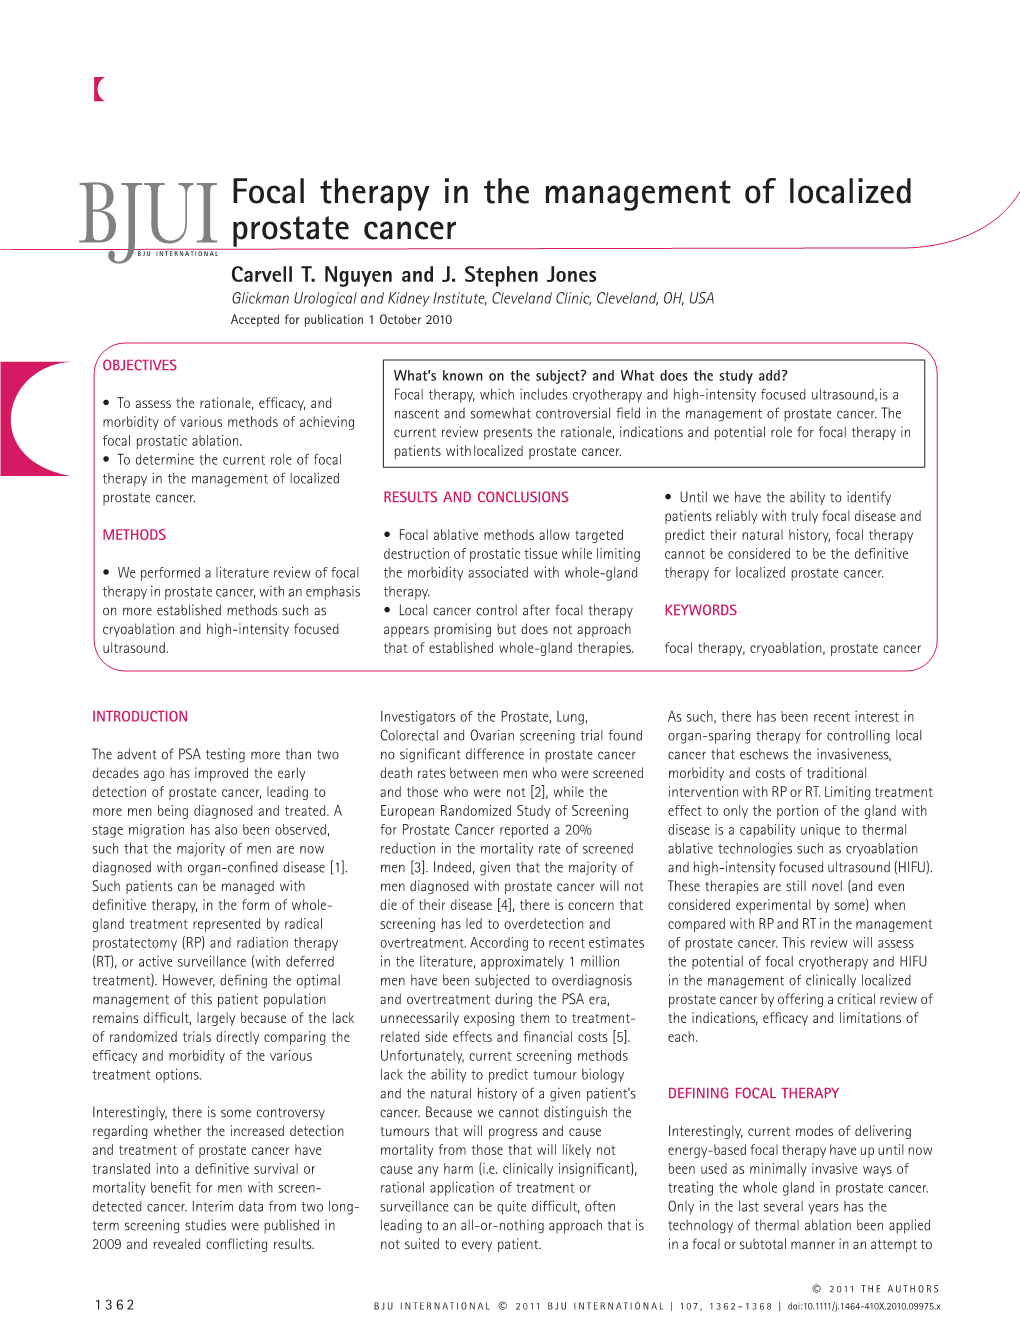 Focal Therapy in the Management of Localized Prostate Cancer BJUIBJU INTERNATIONAL Carvell T